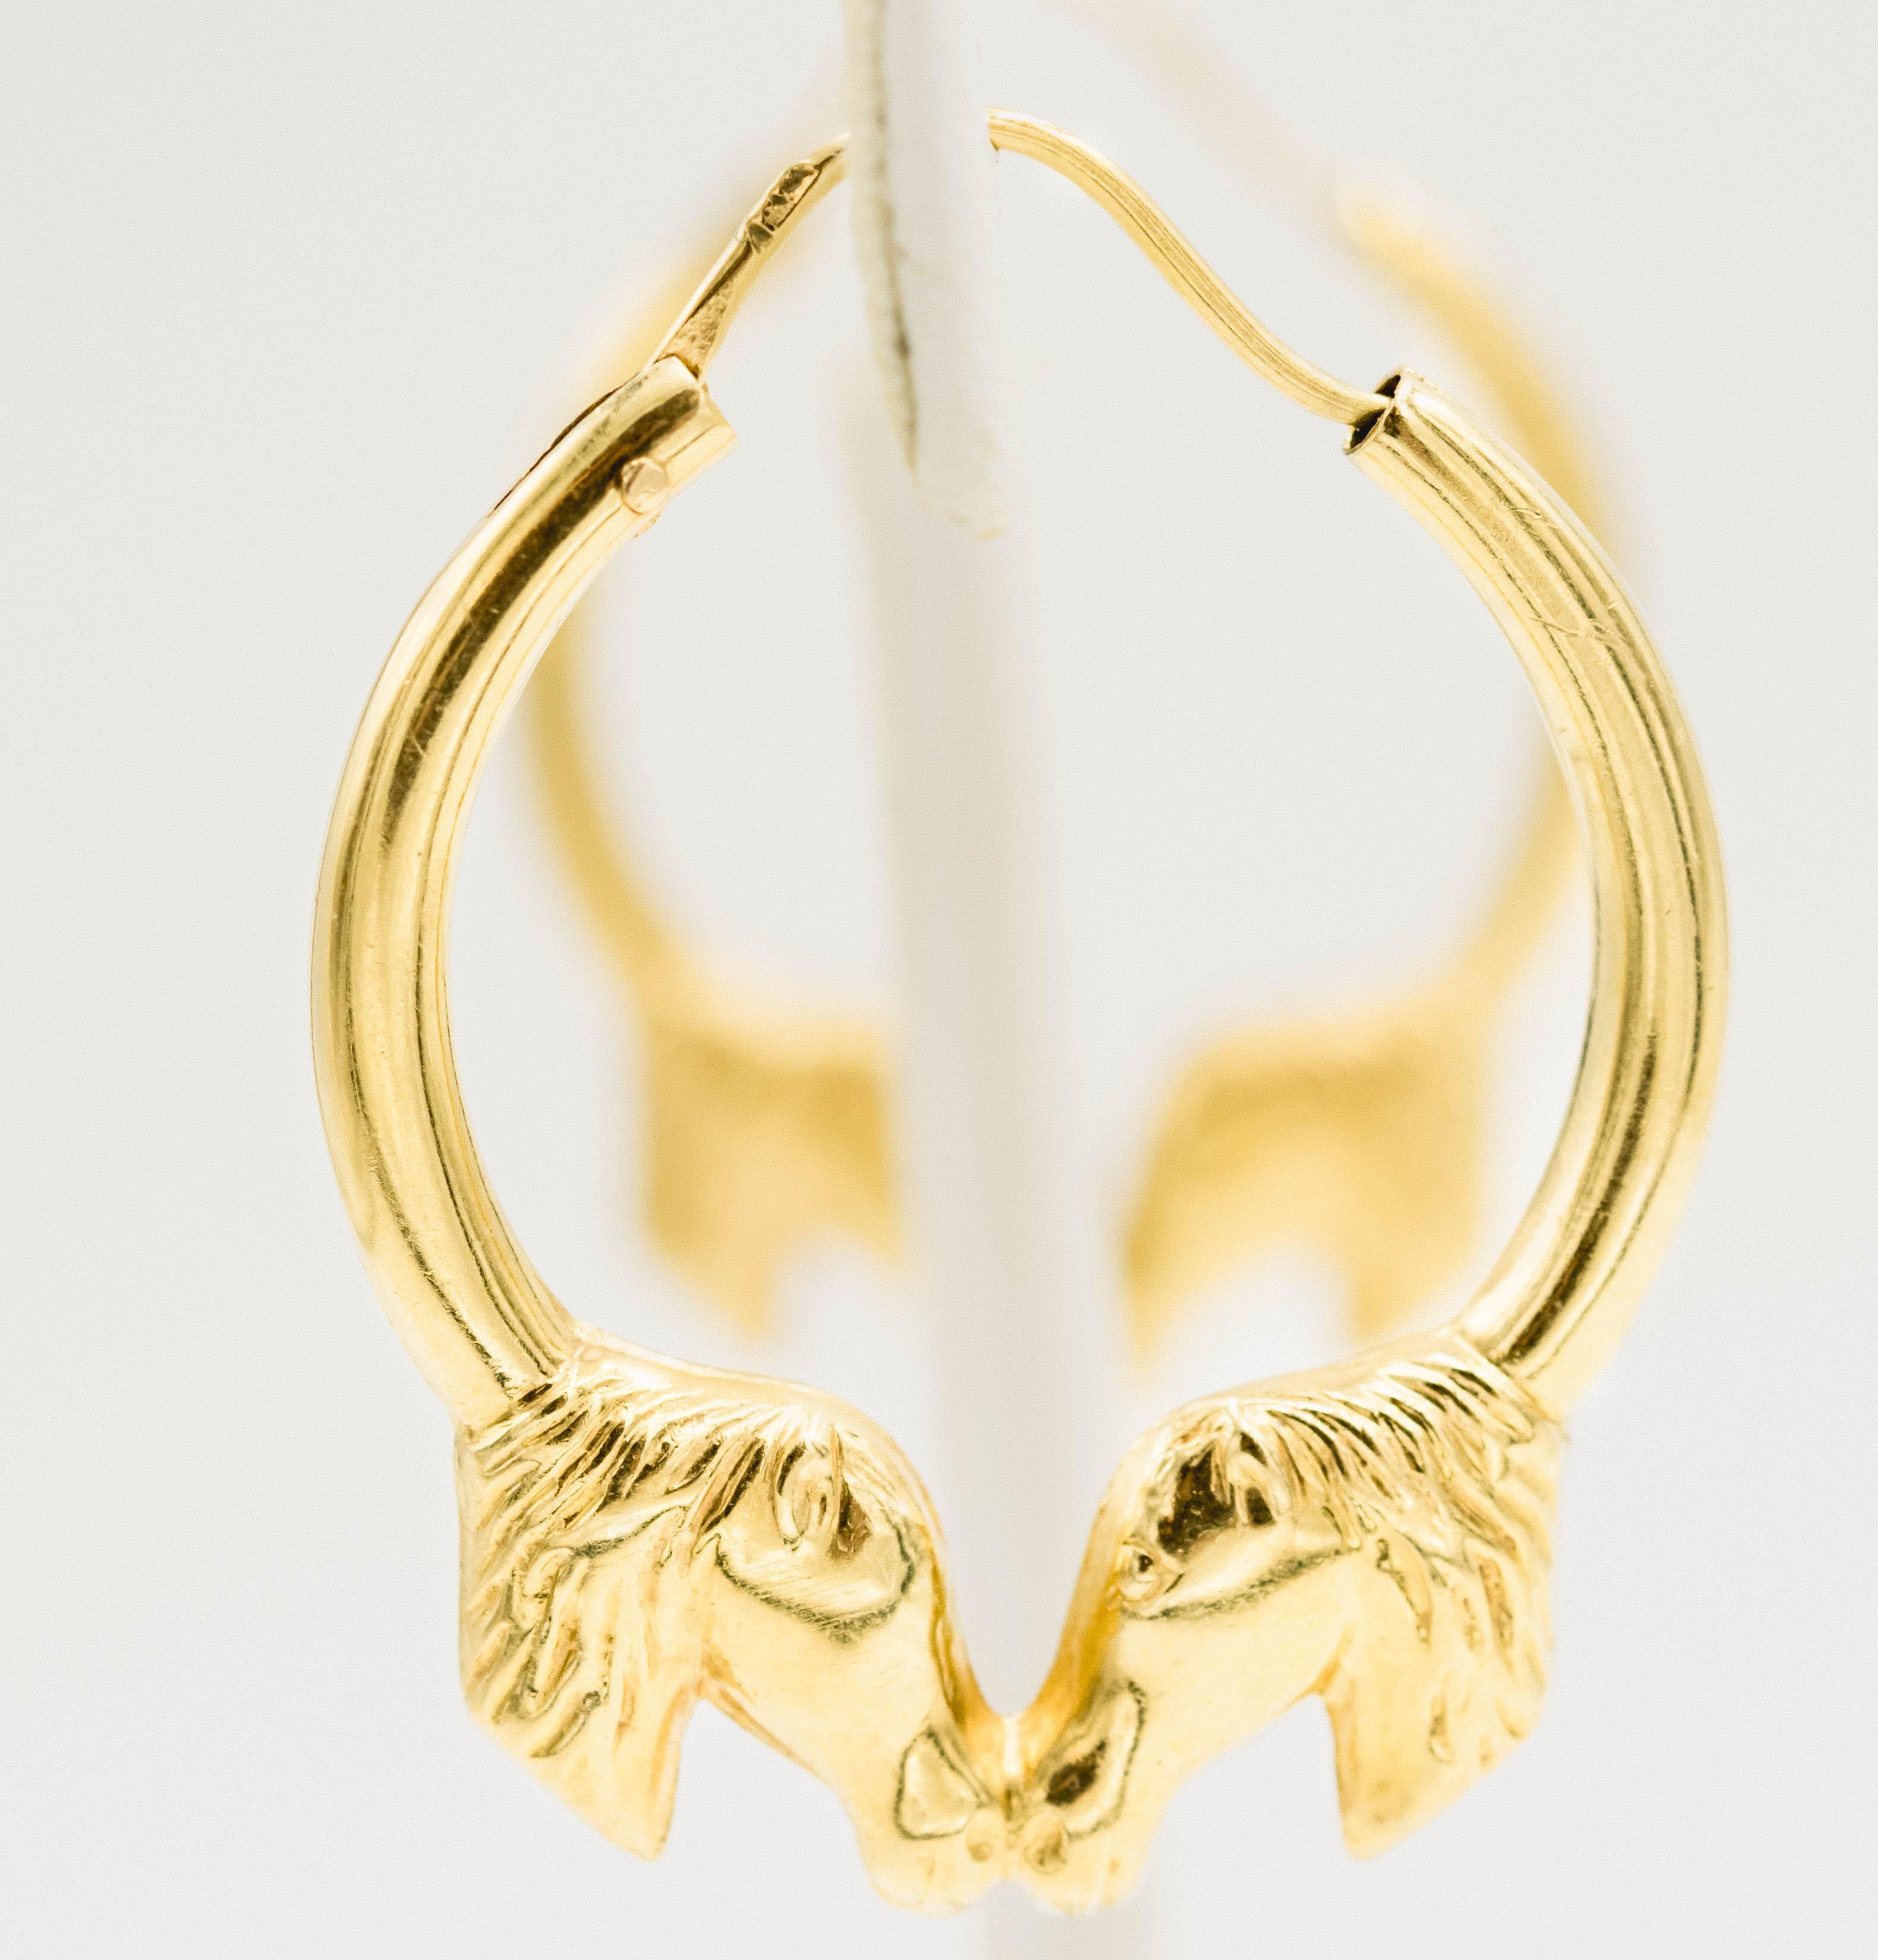 18k Yellow gold hoop earrings with two horses touching noses.  A perfect gift for an equestrian or just someone who loves horses. Marked 750 for 18k on the post.  They are lightweight so easy to wear.